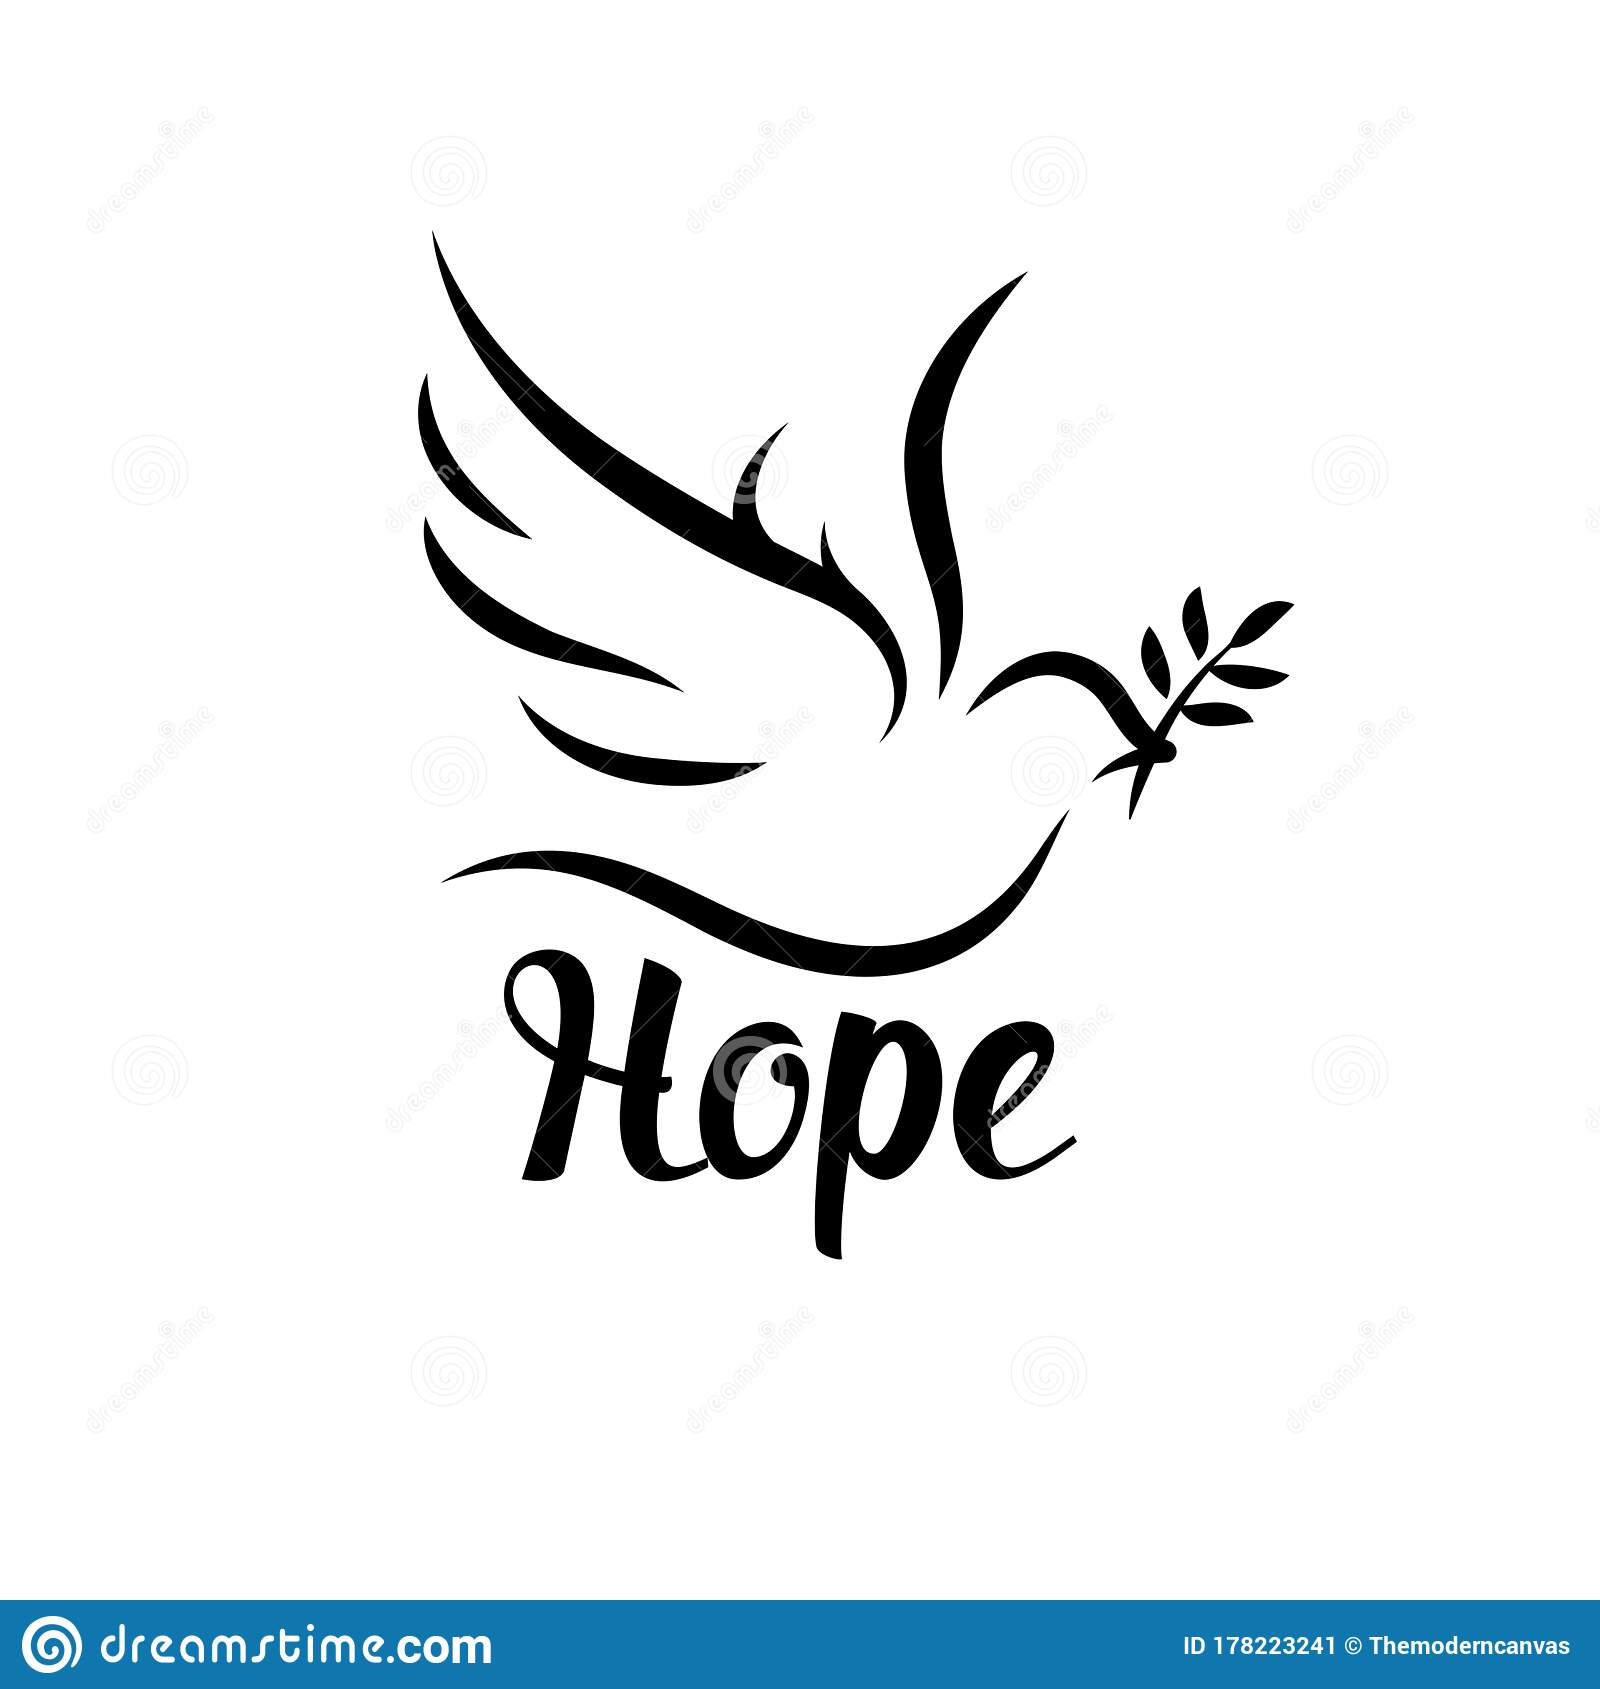 Why dove is a symbol of hope?